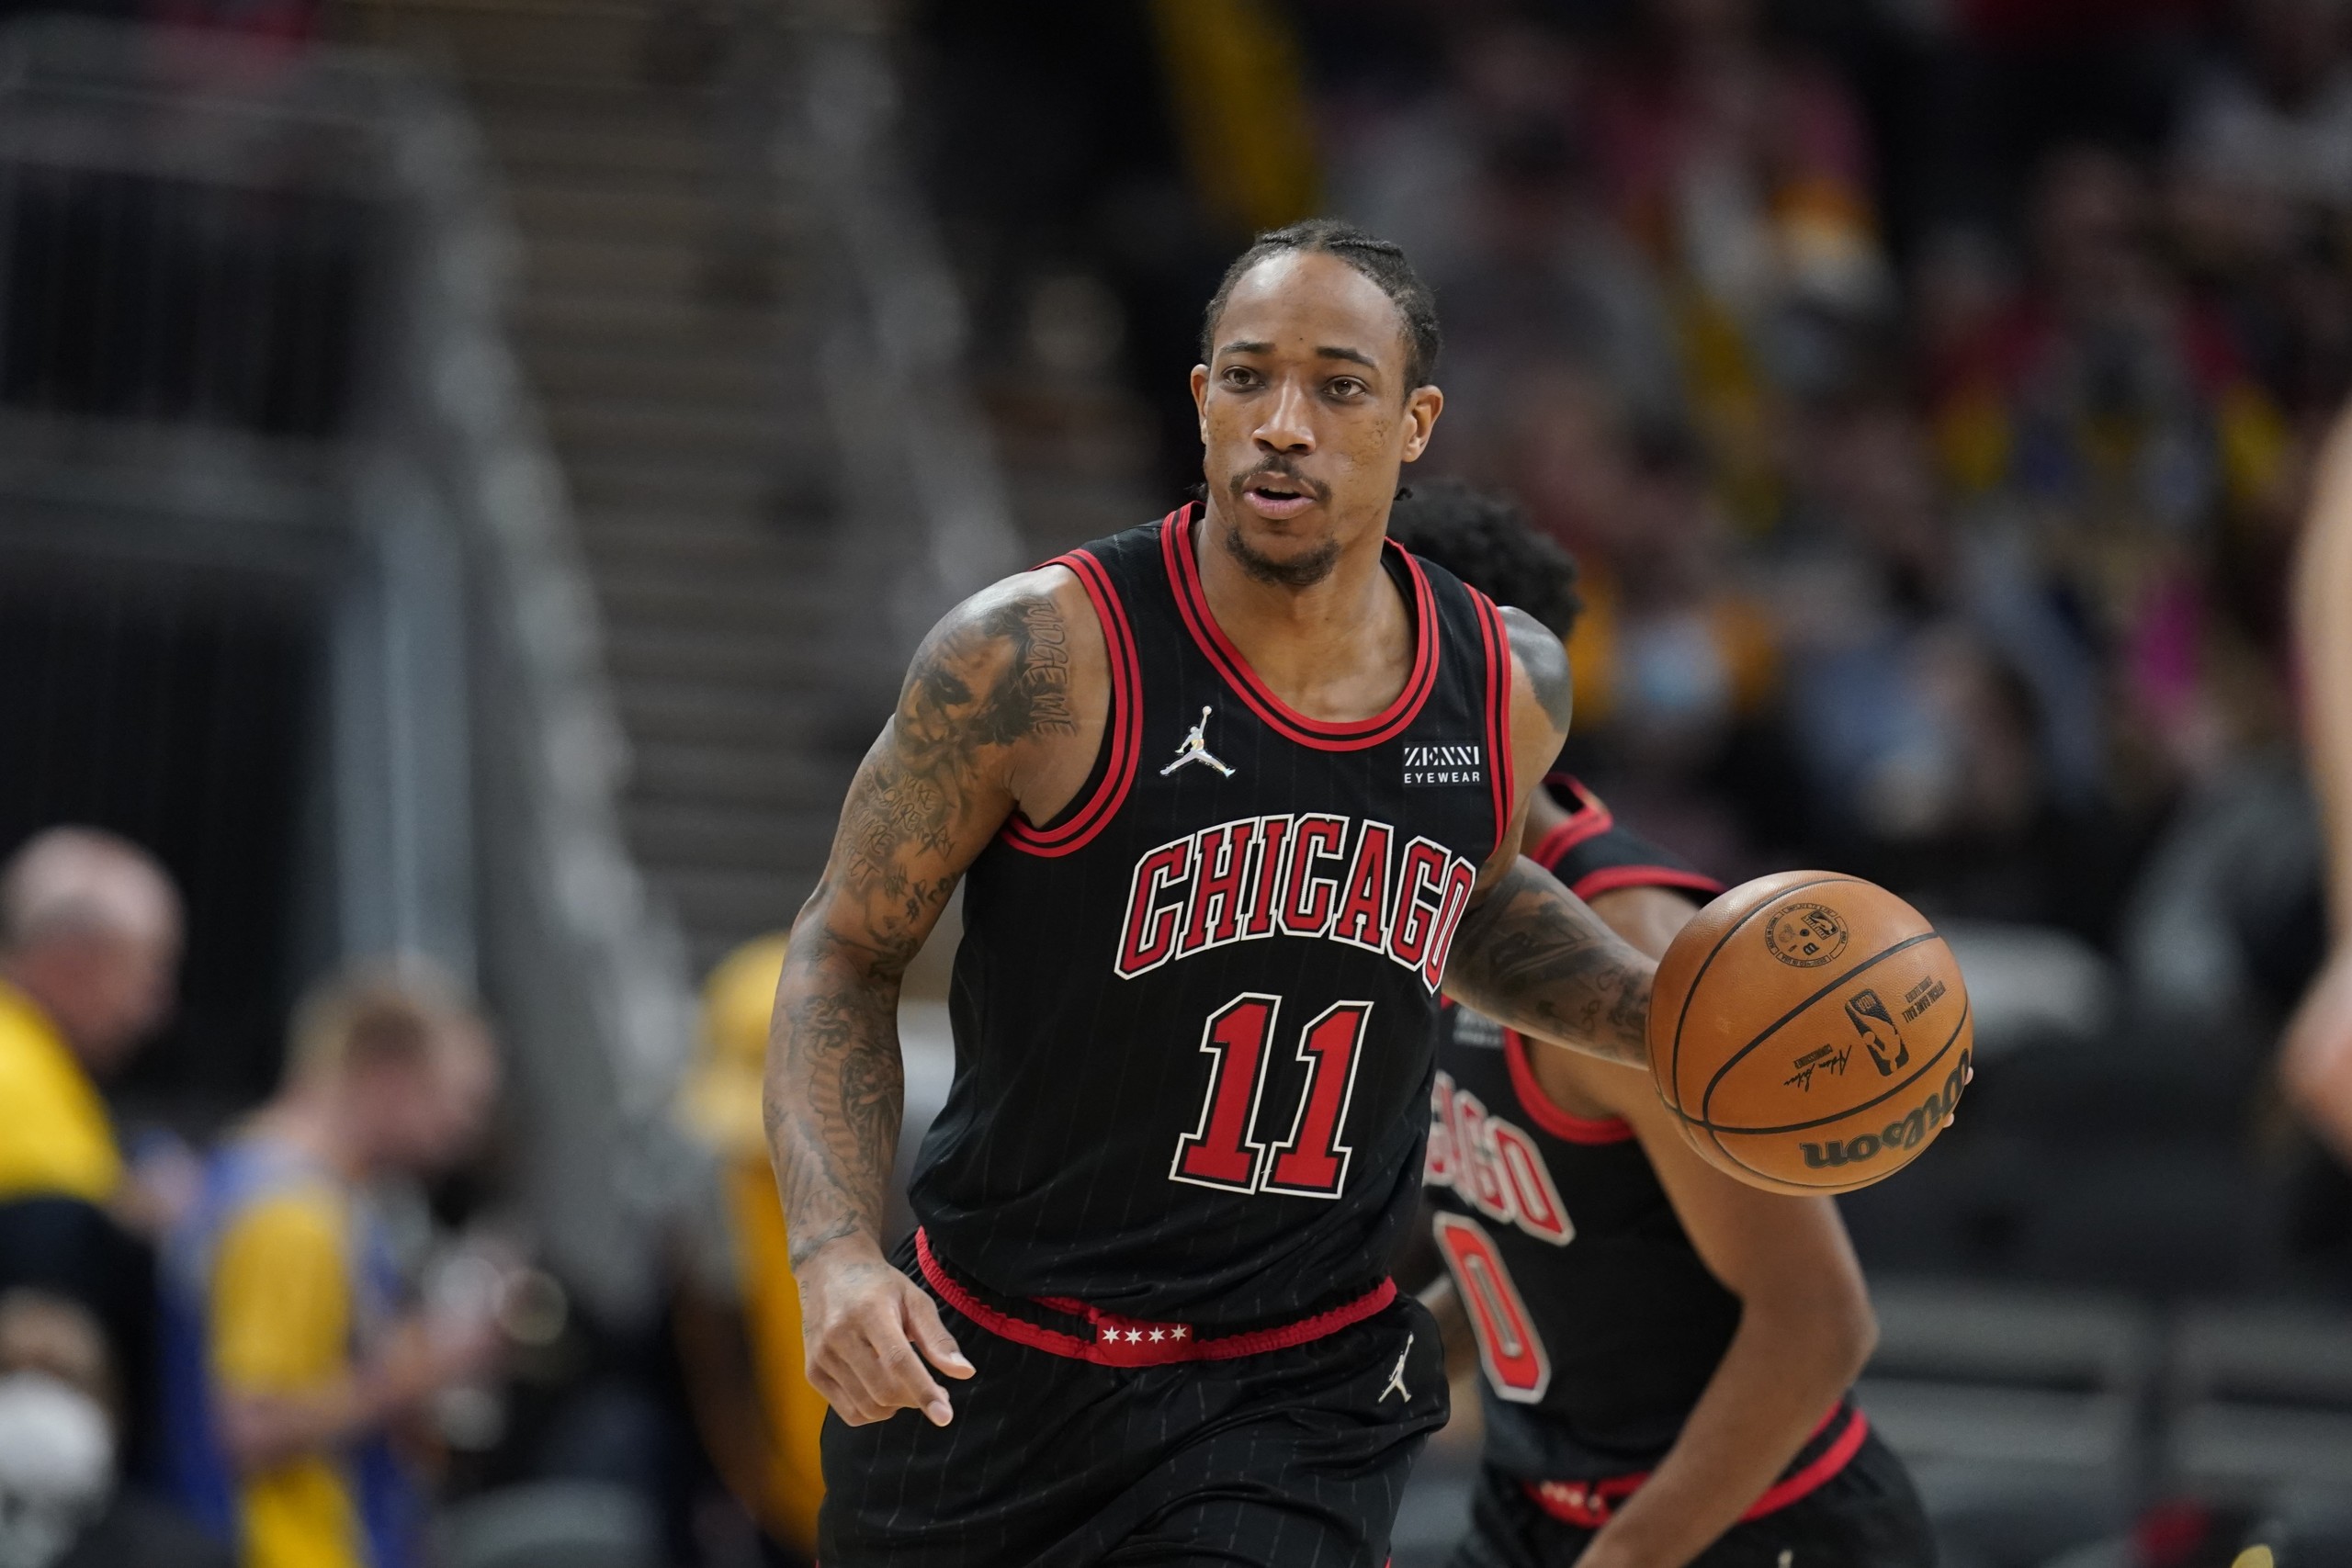 Chicago Bulls' DeMar DeRozan (11) dribbles during the second half of an NBA basketball game against the Indiana Pacers, Friday, Dec. 31, 2021, in Indianapolis. (AP Photo/Darron Cummings)